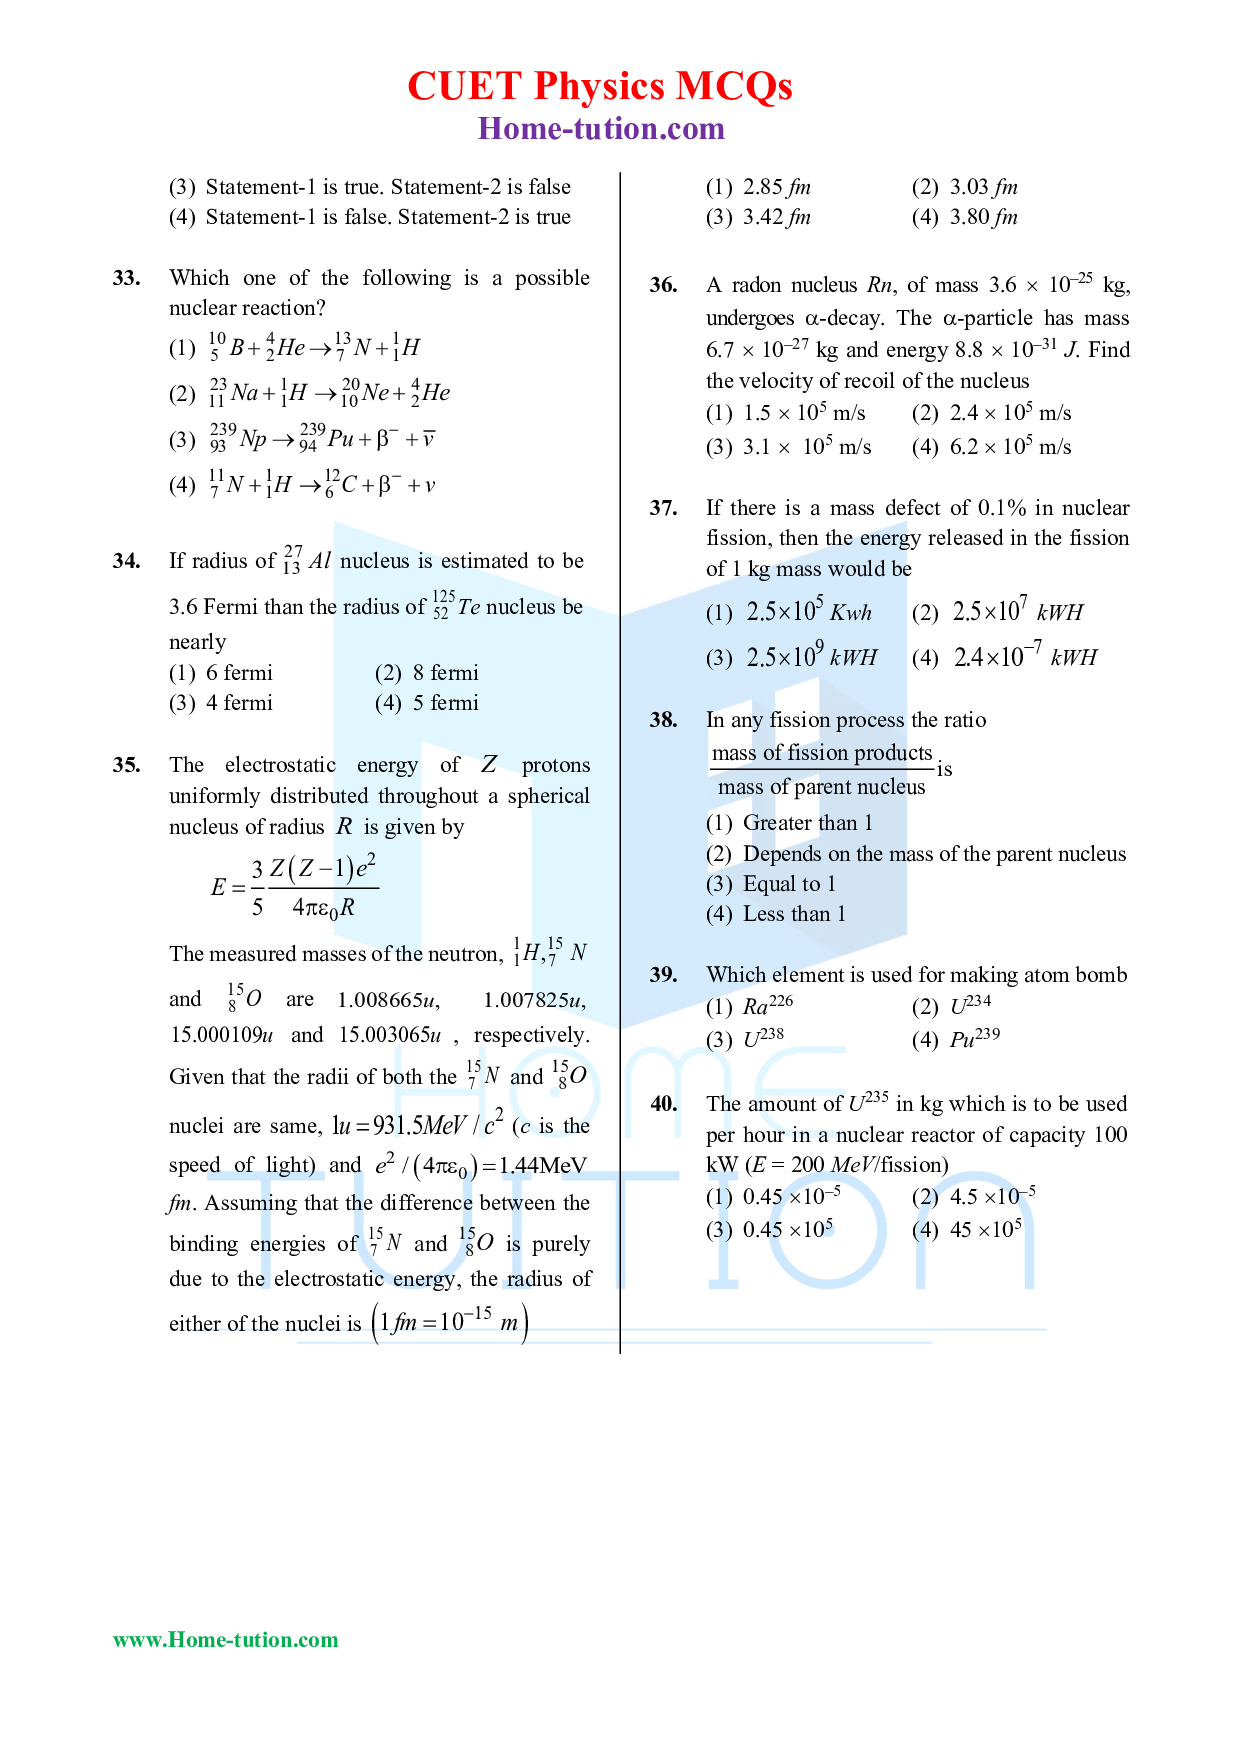 CUET MCQ Questions For Physics Chapter-13 Nuclei